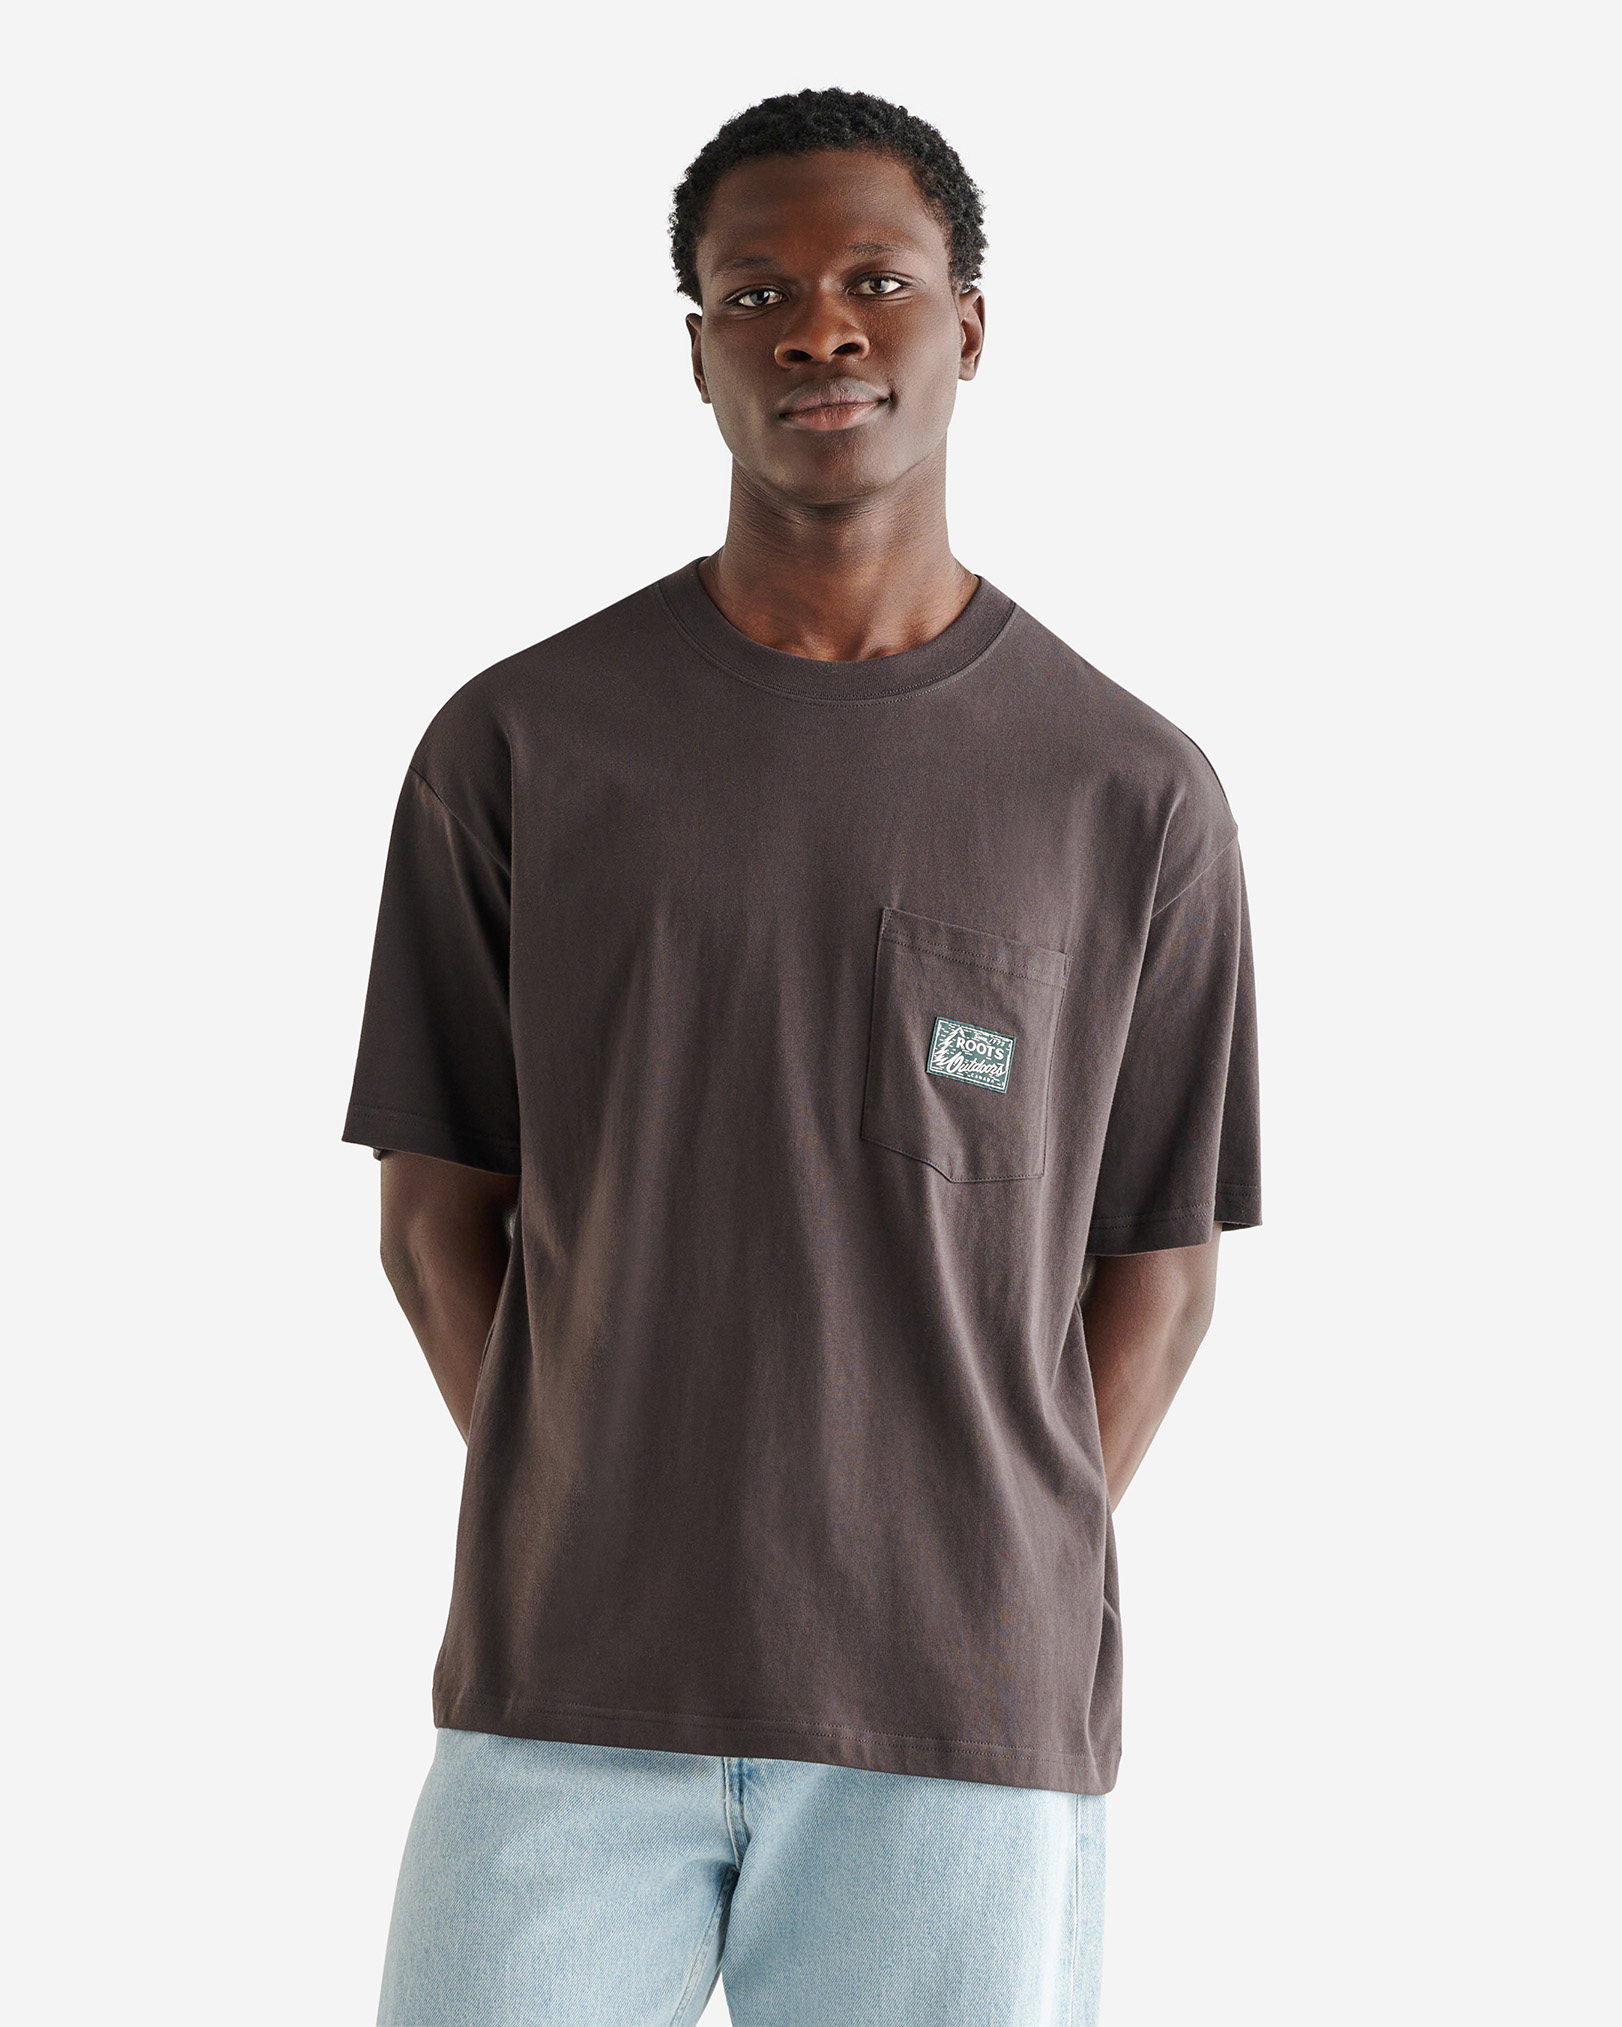 Roots Men's Outdoors Pocket T-Shirt in Charcoal Black